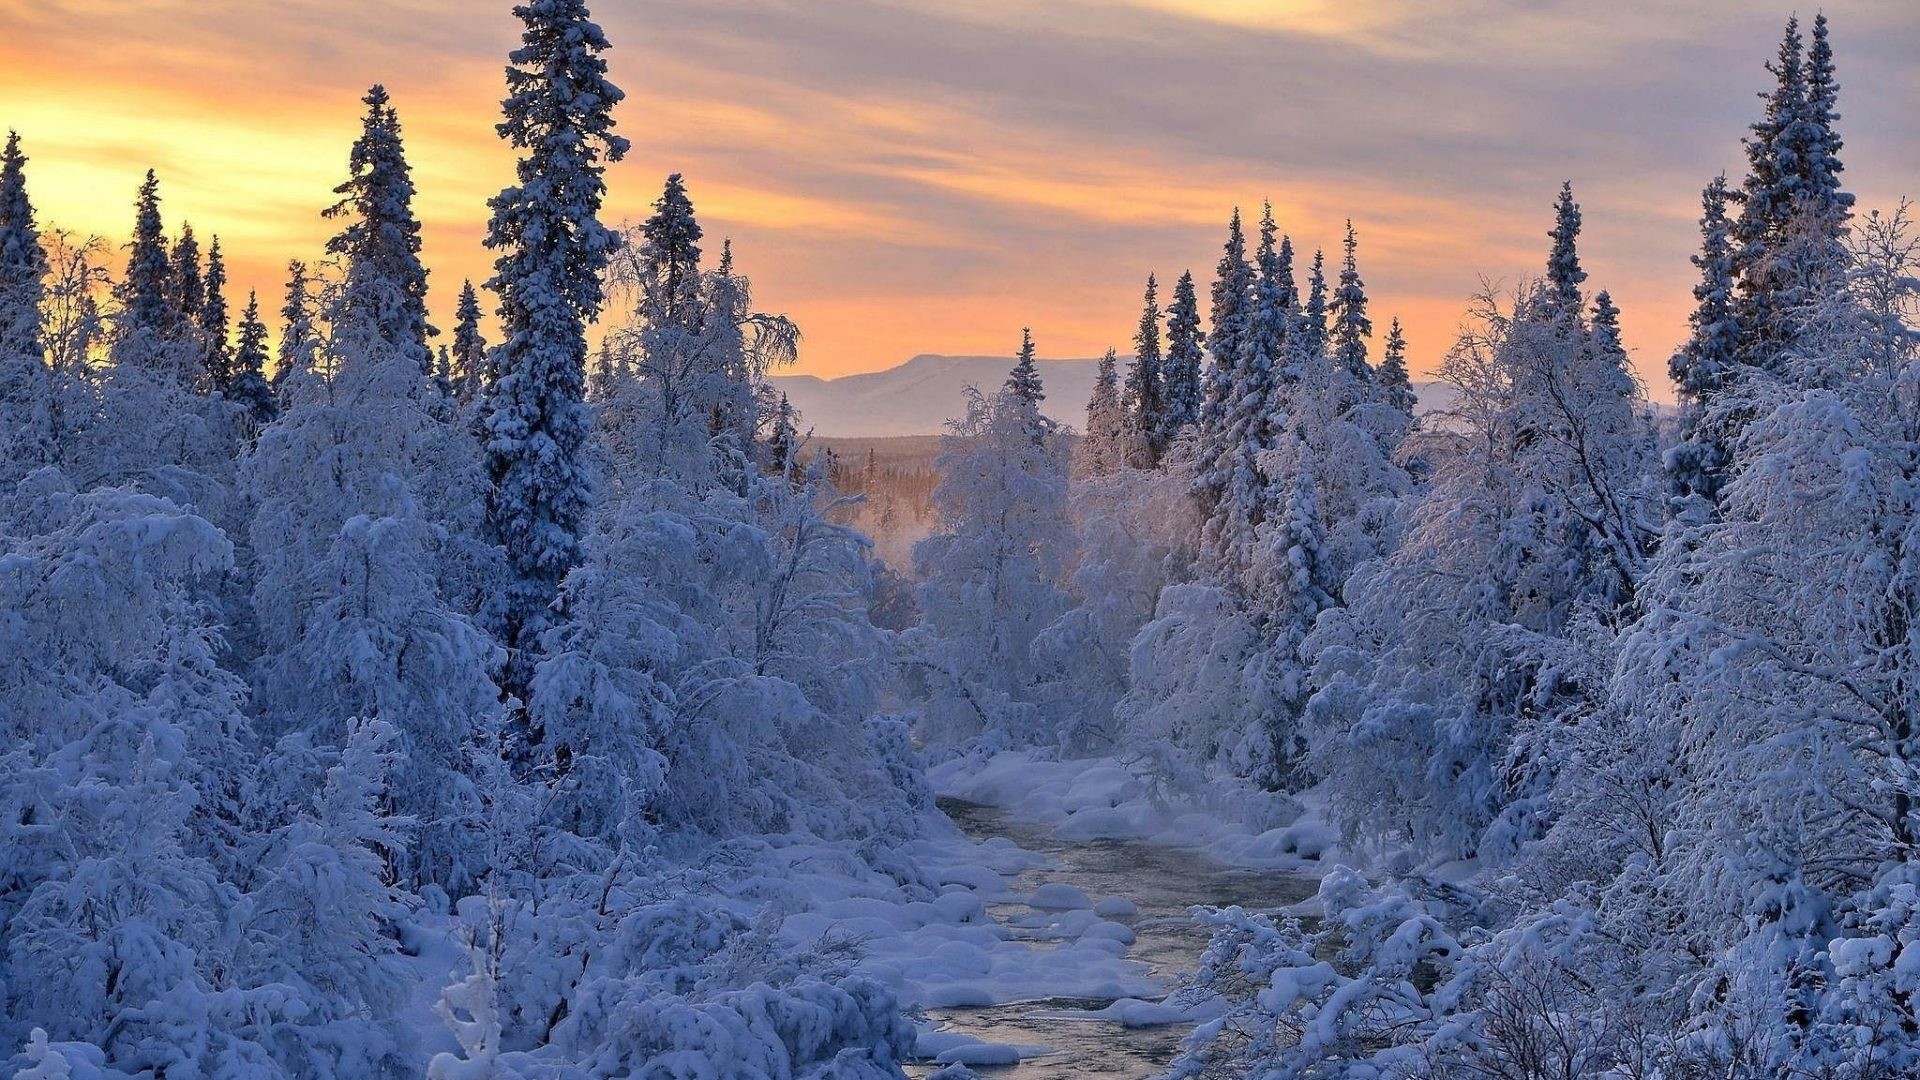 1920x1080 Rivers - Landscape River Winter Sunset Snow Beautiful Nature Hd Wallpapers  Free Download for HD 16